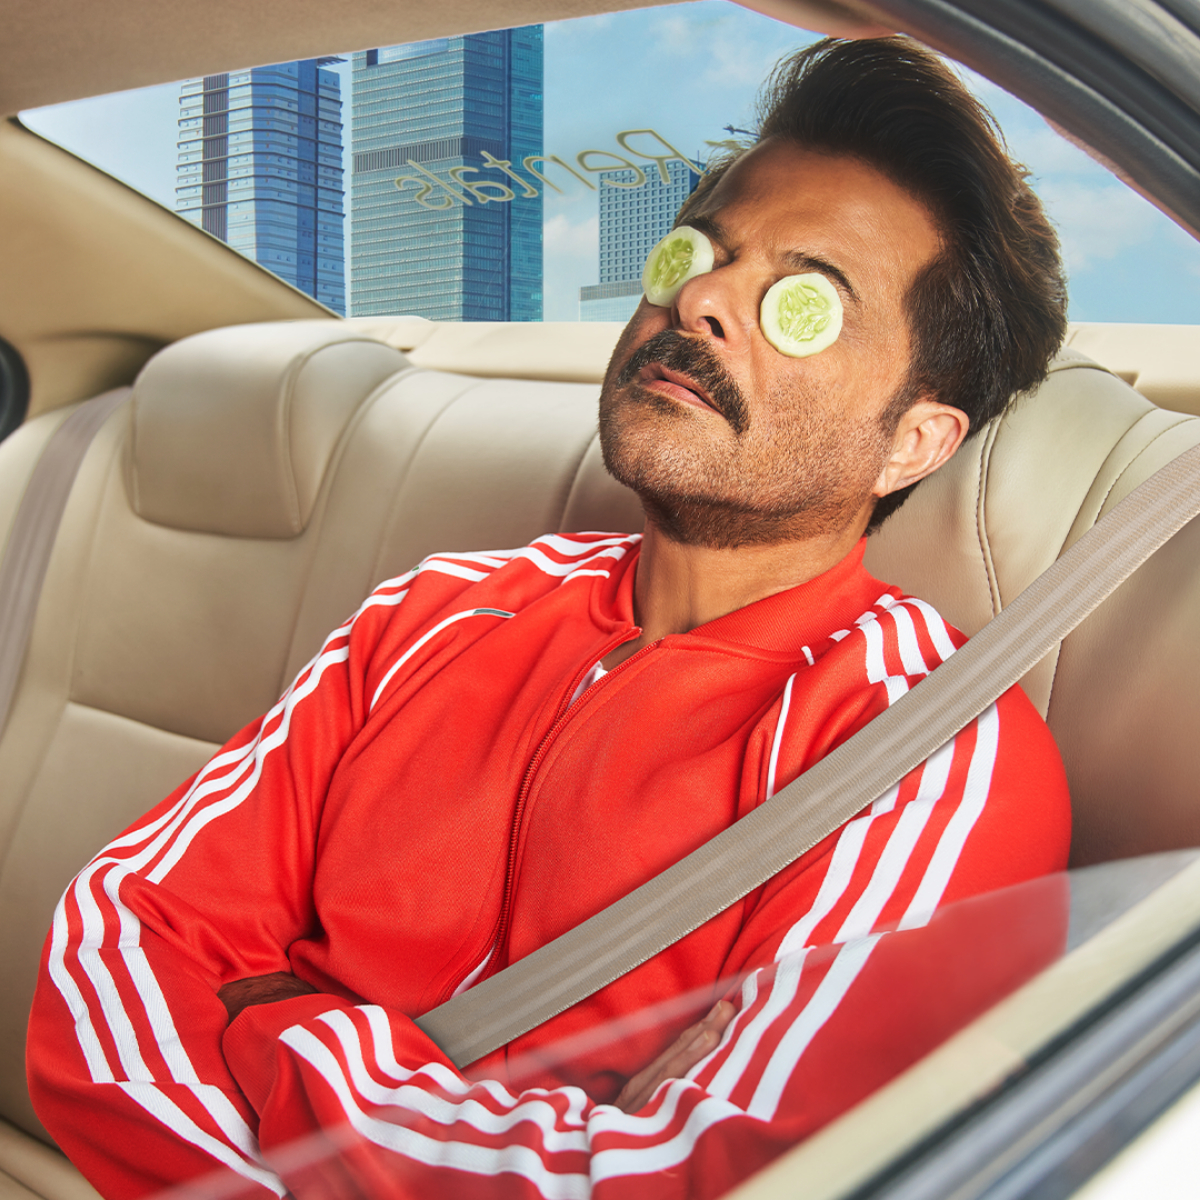 Just IN! Anil Kapoor is taking this route on Uber to get a forever youthful look!